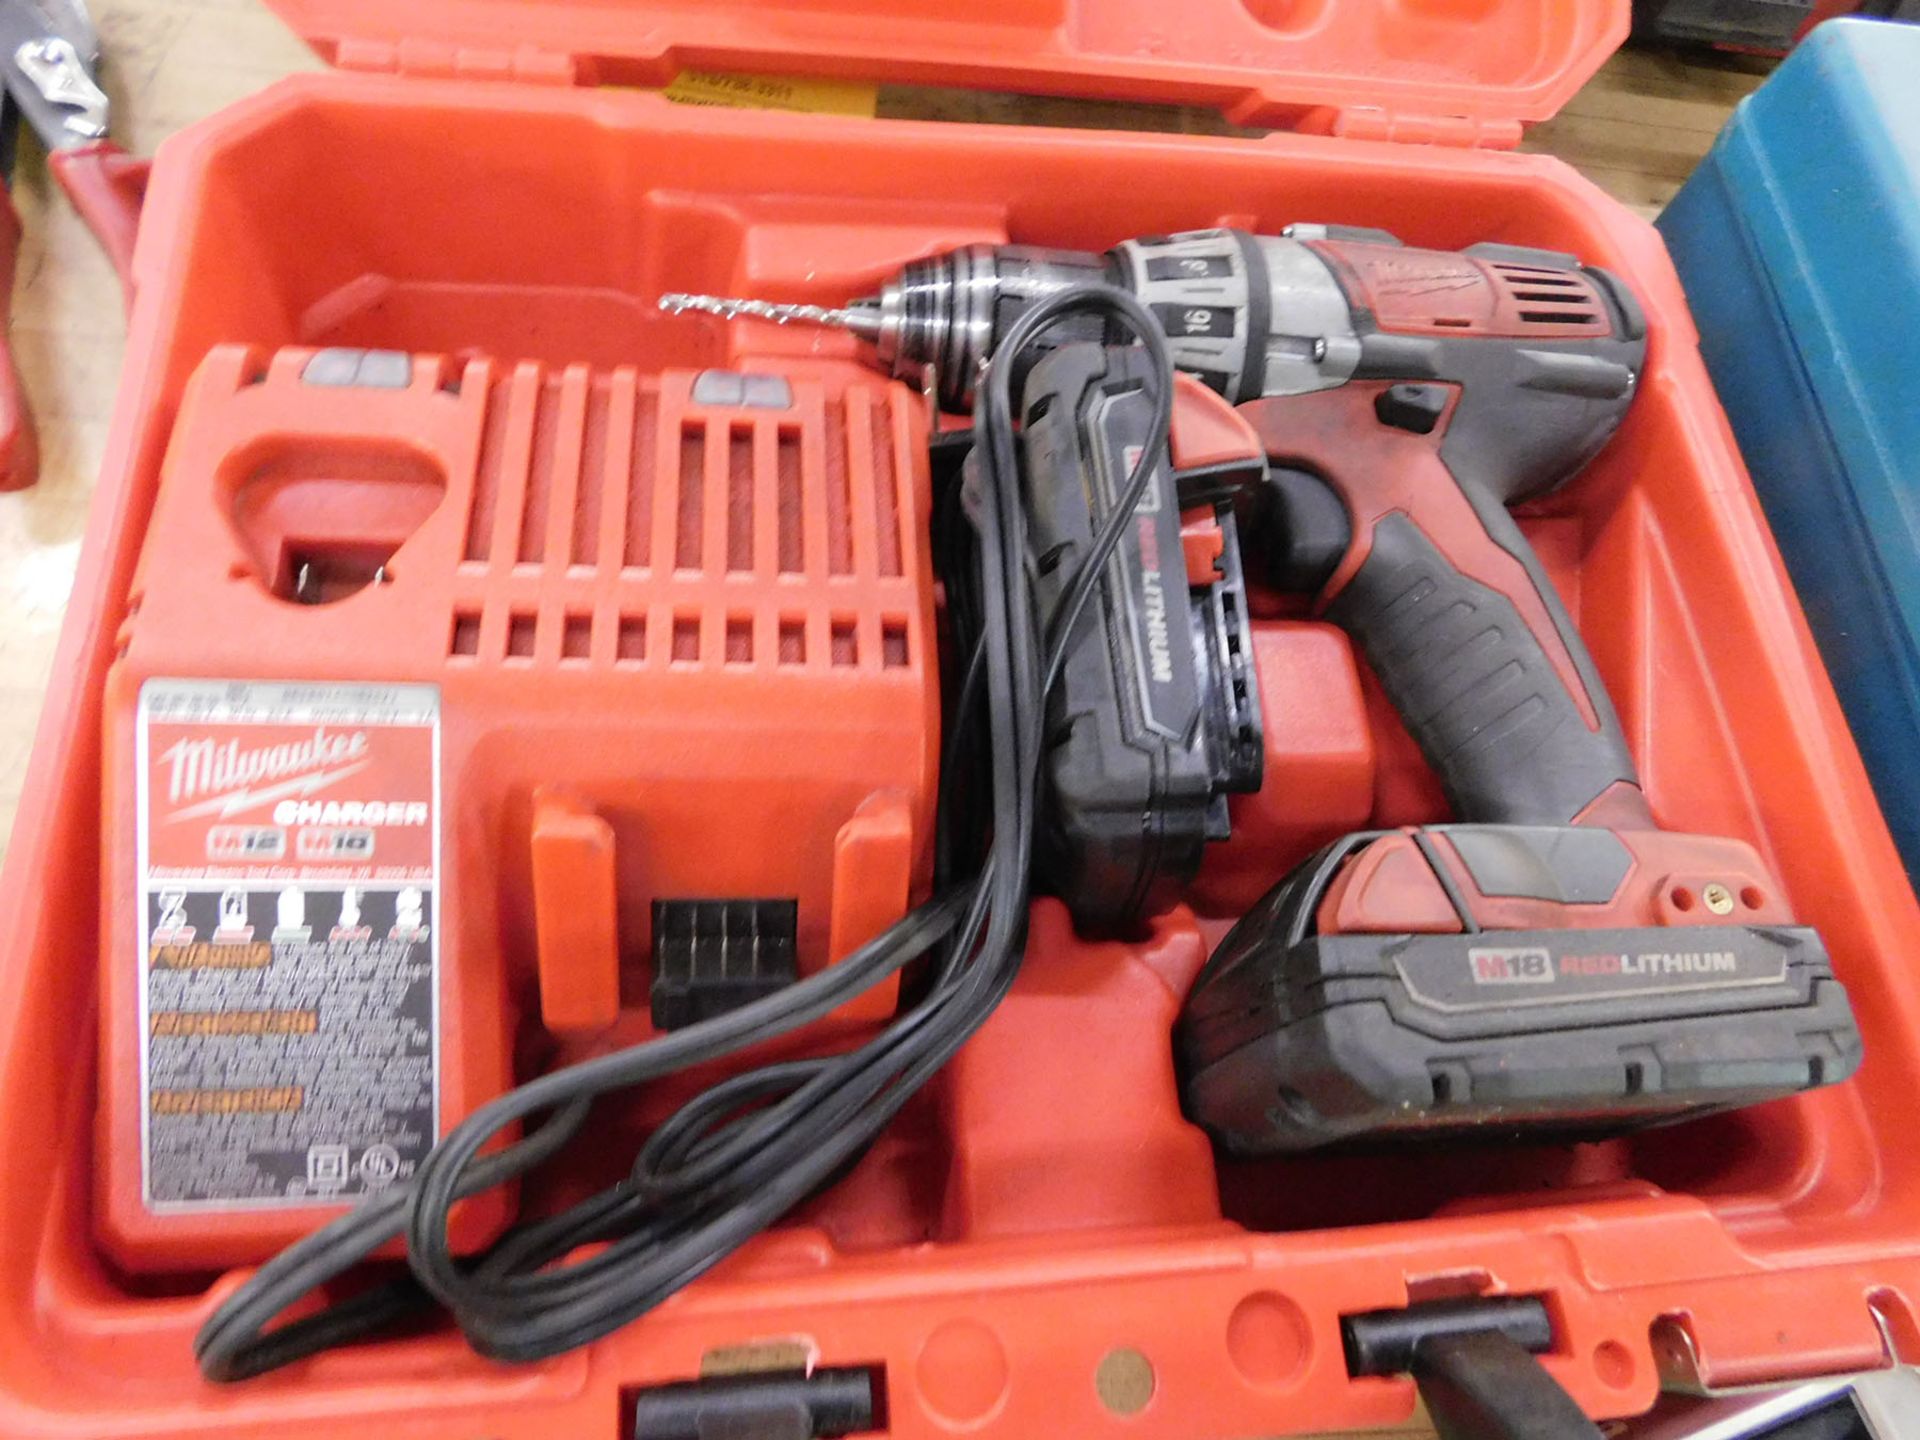 MILWAUKEE 1/2'' CORDLESS DRILL; CAT# 2601-20, 18-VOLT, S/N B28DD131307782 WITH CHARGER AND BATTERY